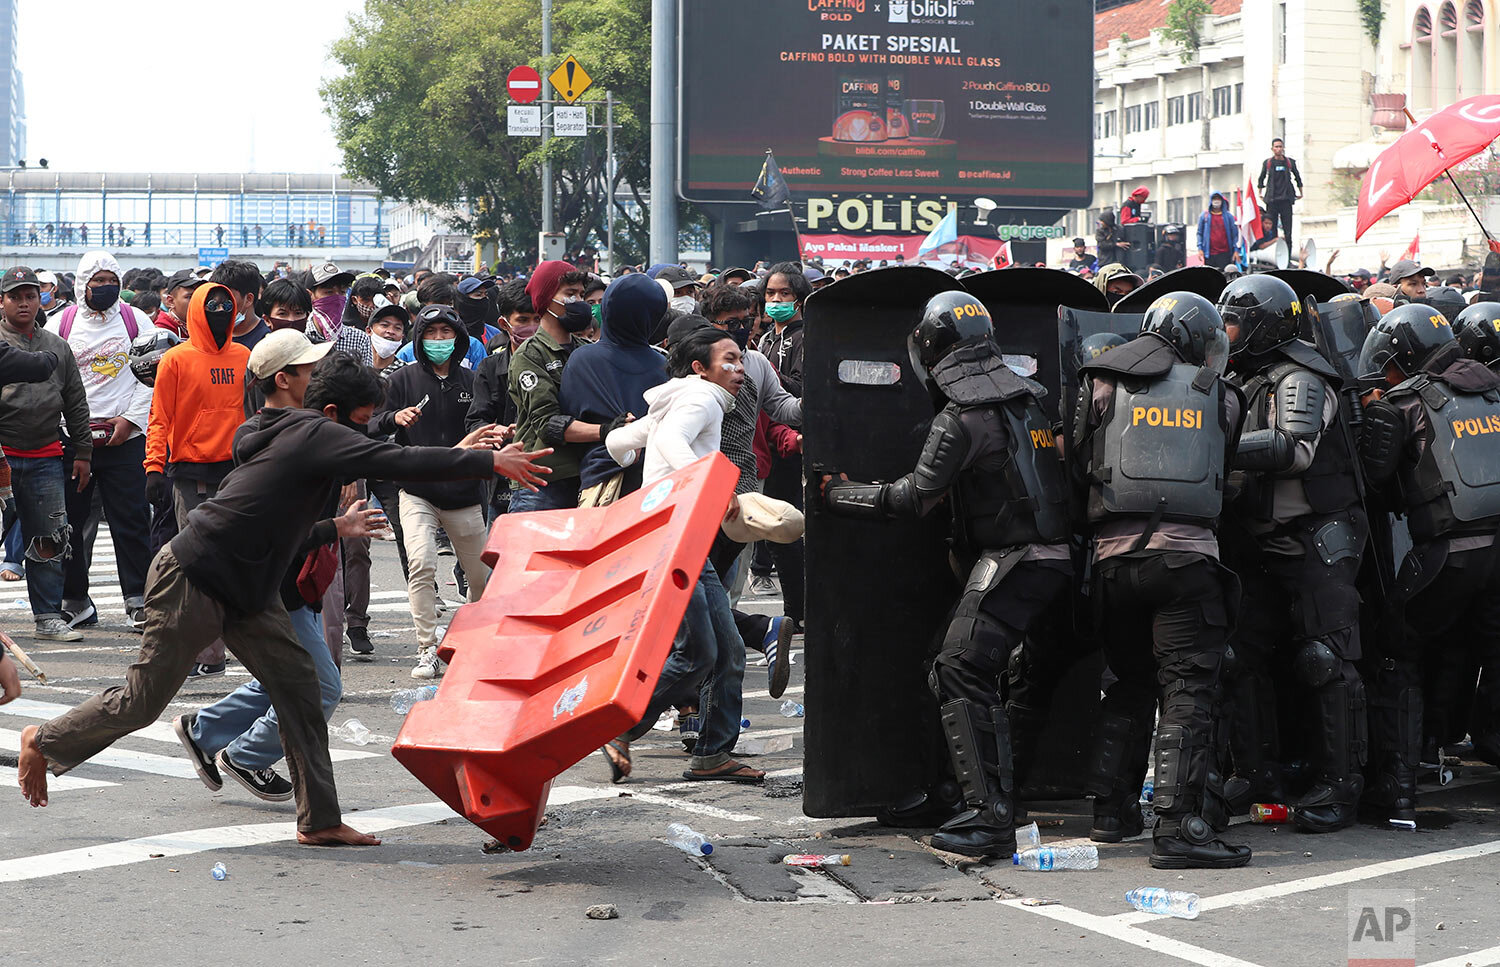  Police in riot gear try to block protesters from advancing towards the Presidential Palace during a rally in Jakarta, Indonesia, Thursday, Oct. 8, 2020.  (AP Photo/Achmad Ibrahim) 